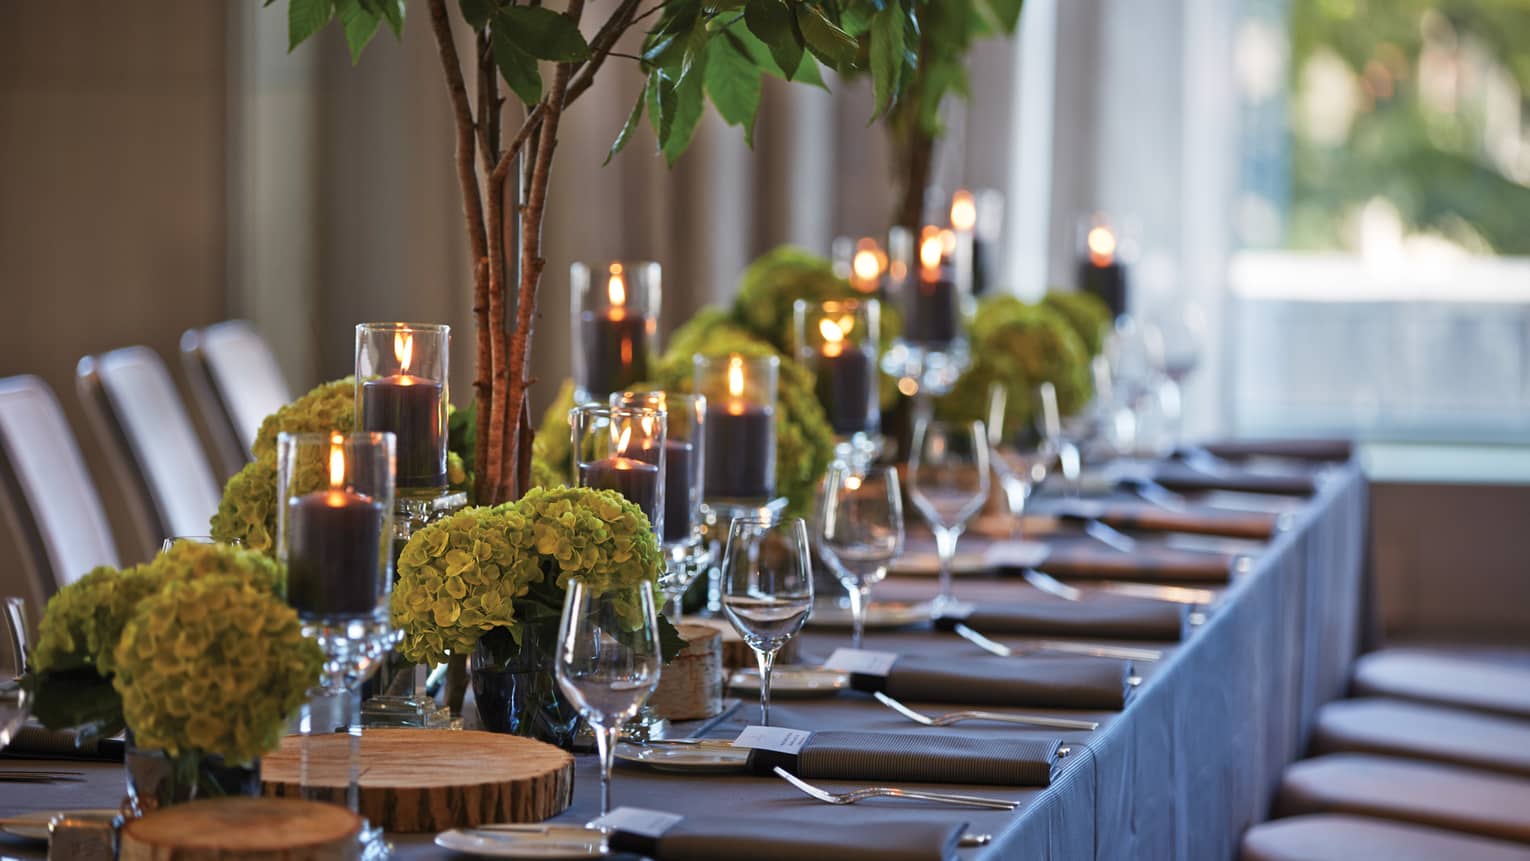 Black pillar candles in votives, green flowers, wine glasses along banquet table